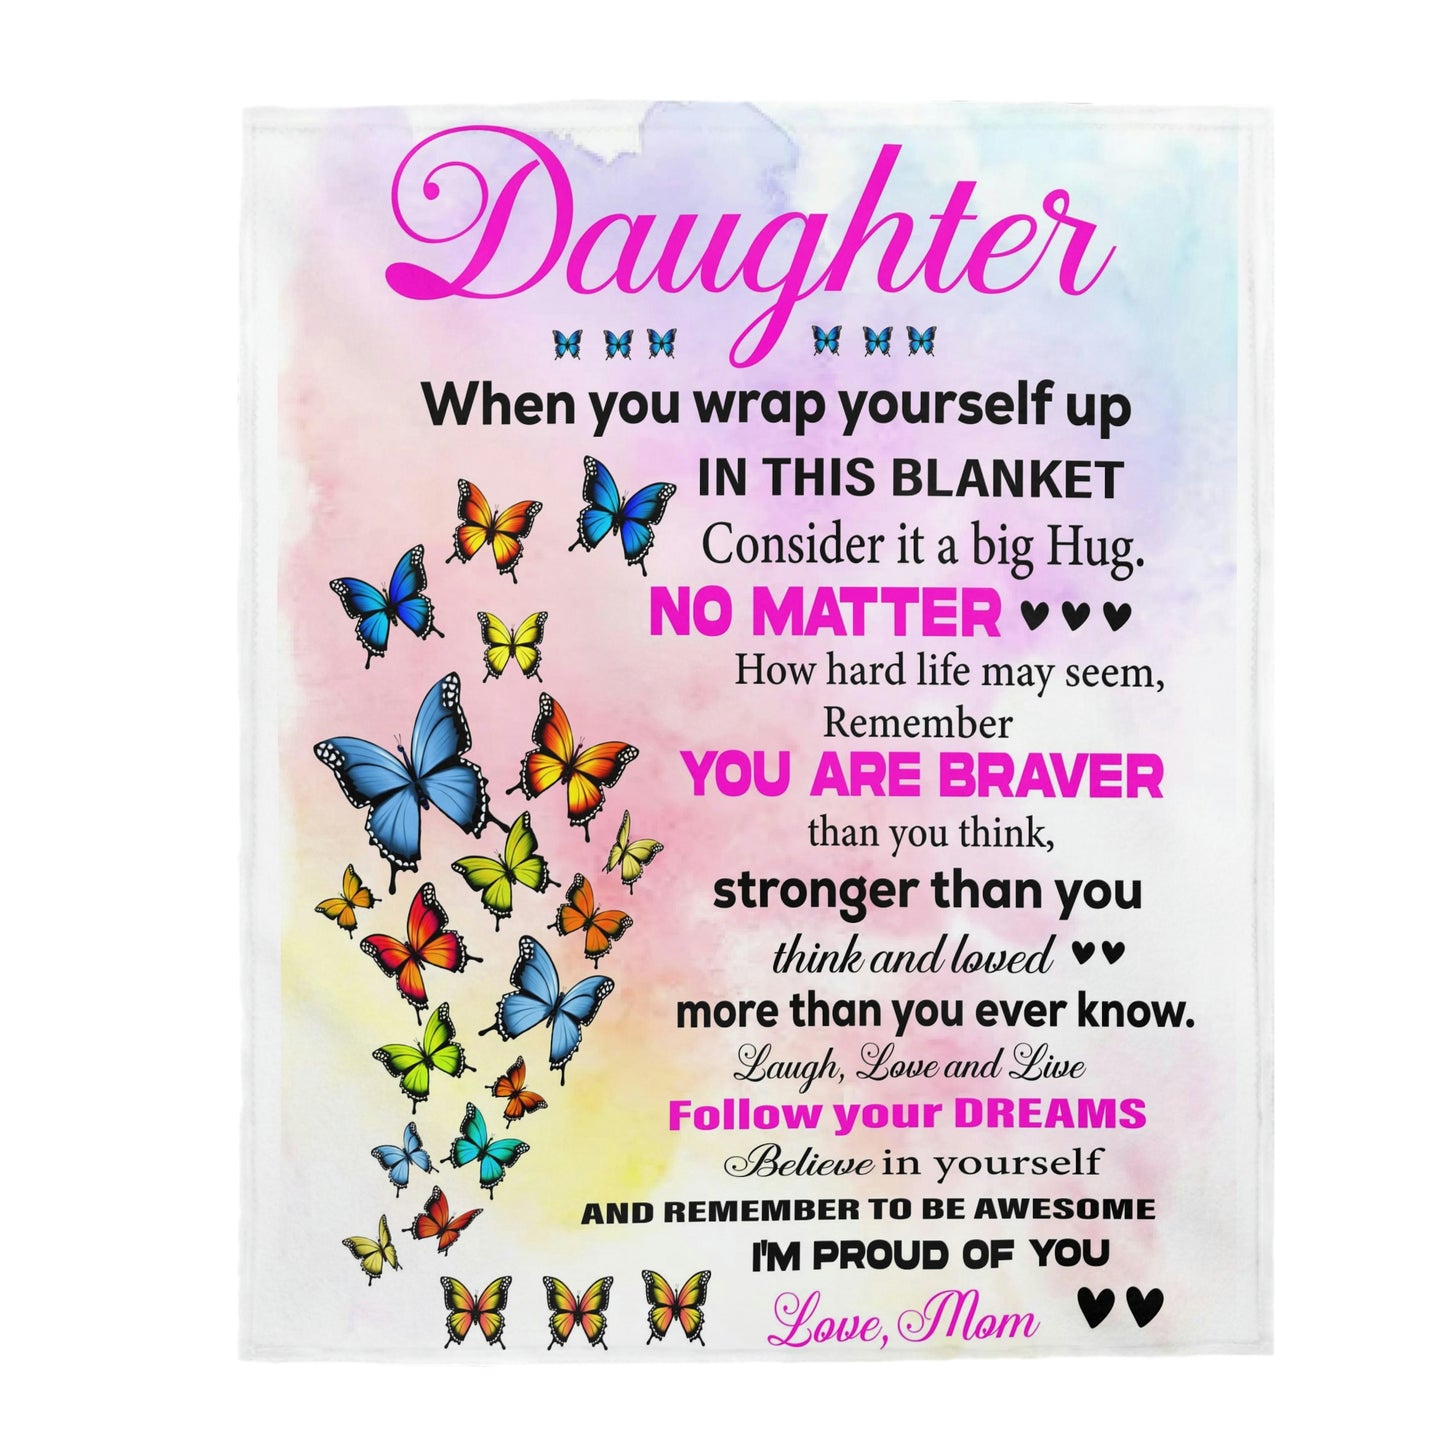 Velveteen Plush Blanket: Dear Daughter you are loved more than you know.